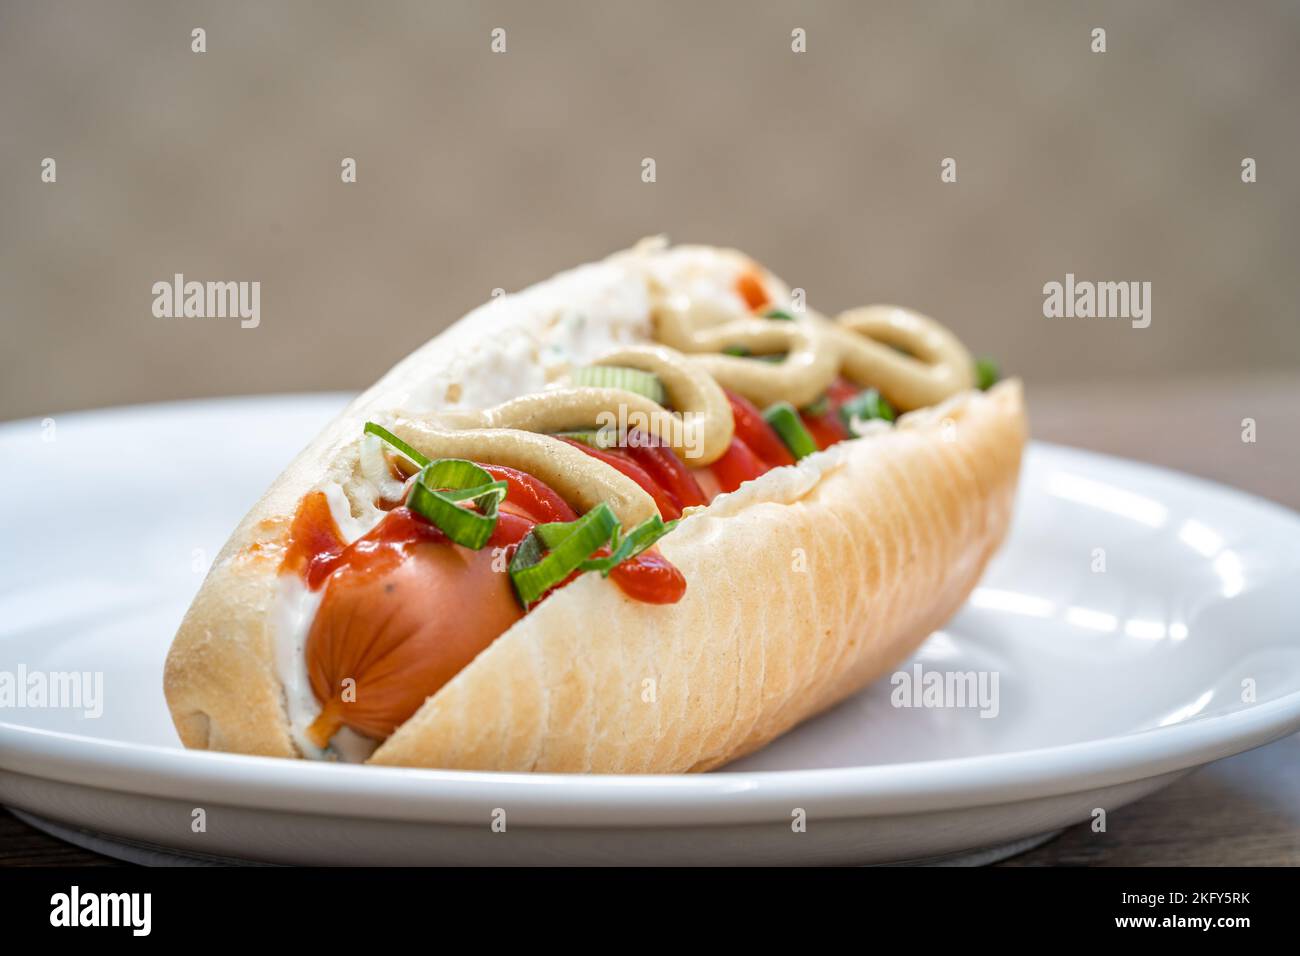 hot dog with mustard ketchup and spring onion Stock Photo